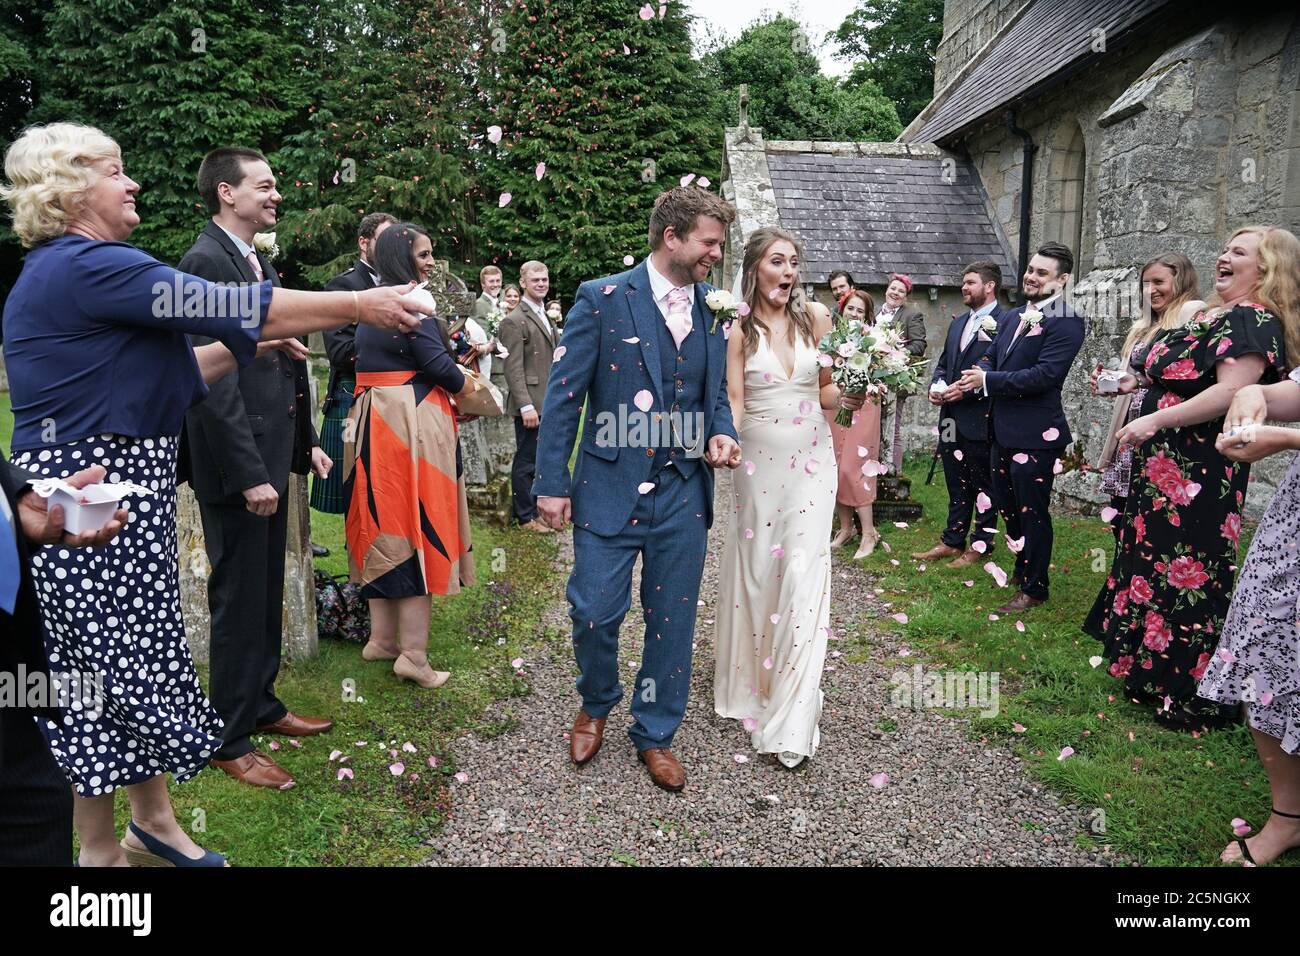 The newly married Mr and Mrs Bone, Lucy and James, after their wedding at St Michael and all Angels Church in Ingram, Northumberland, as weddings are once again permitted to take place in England, with ceremonies capped at a maximum of 30 guests. Stock Photo